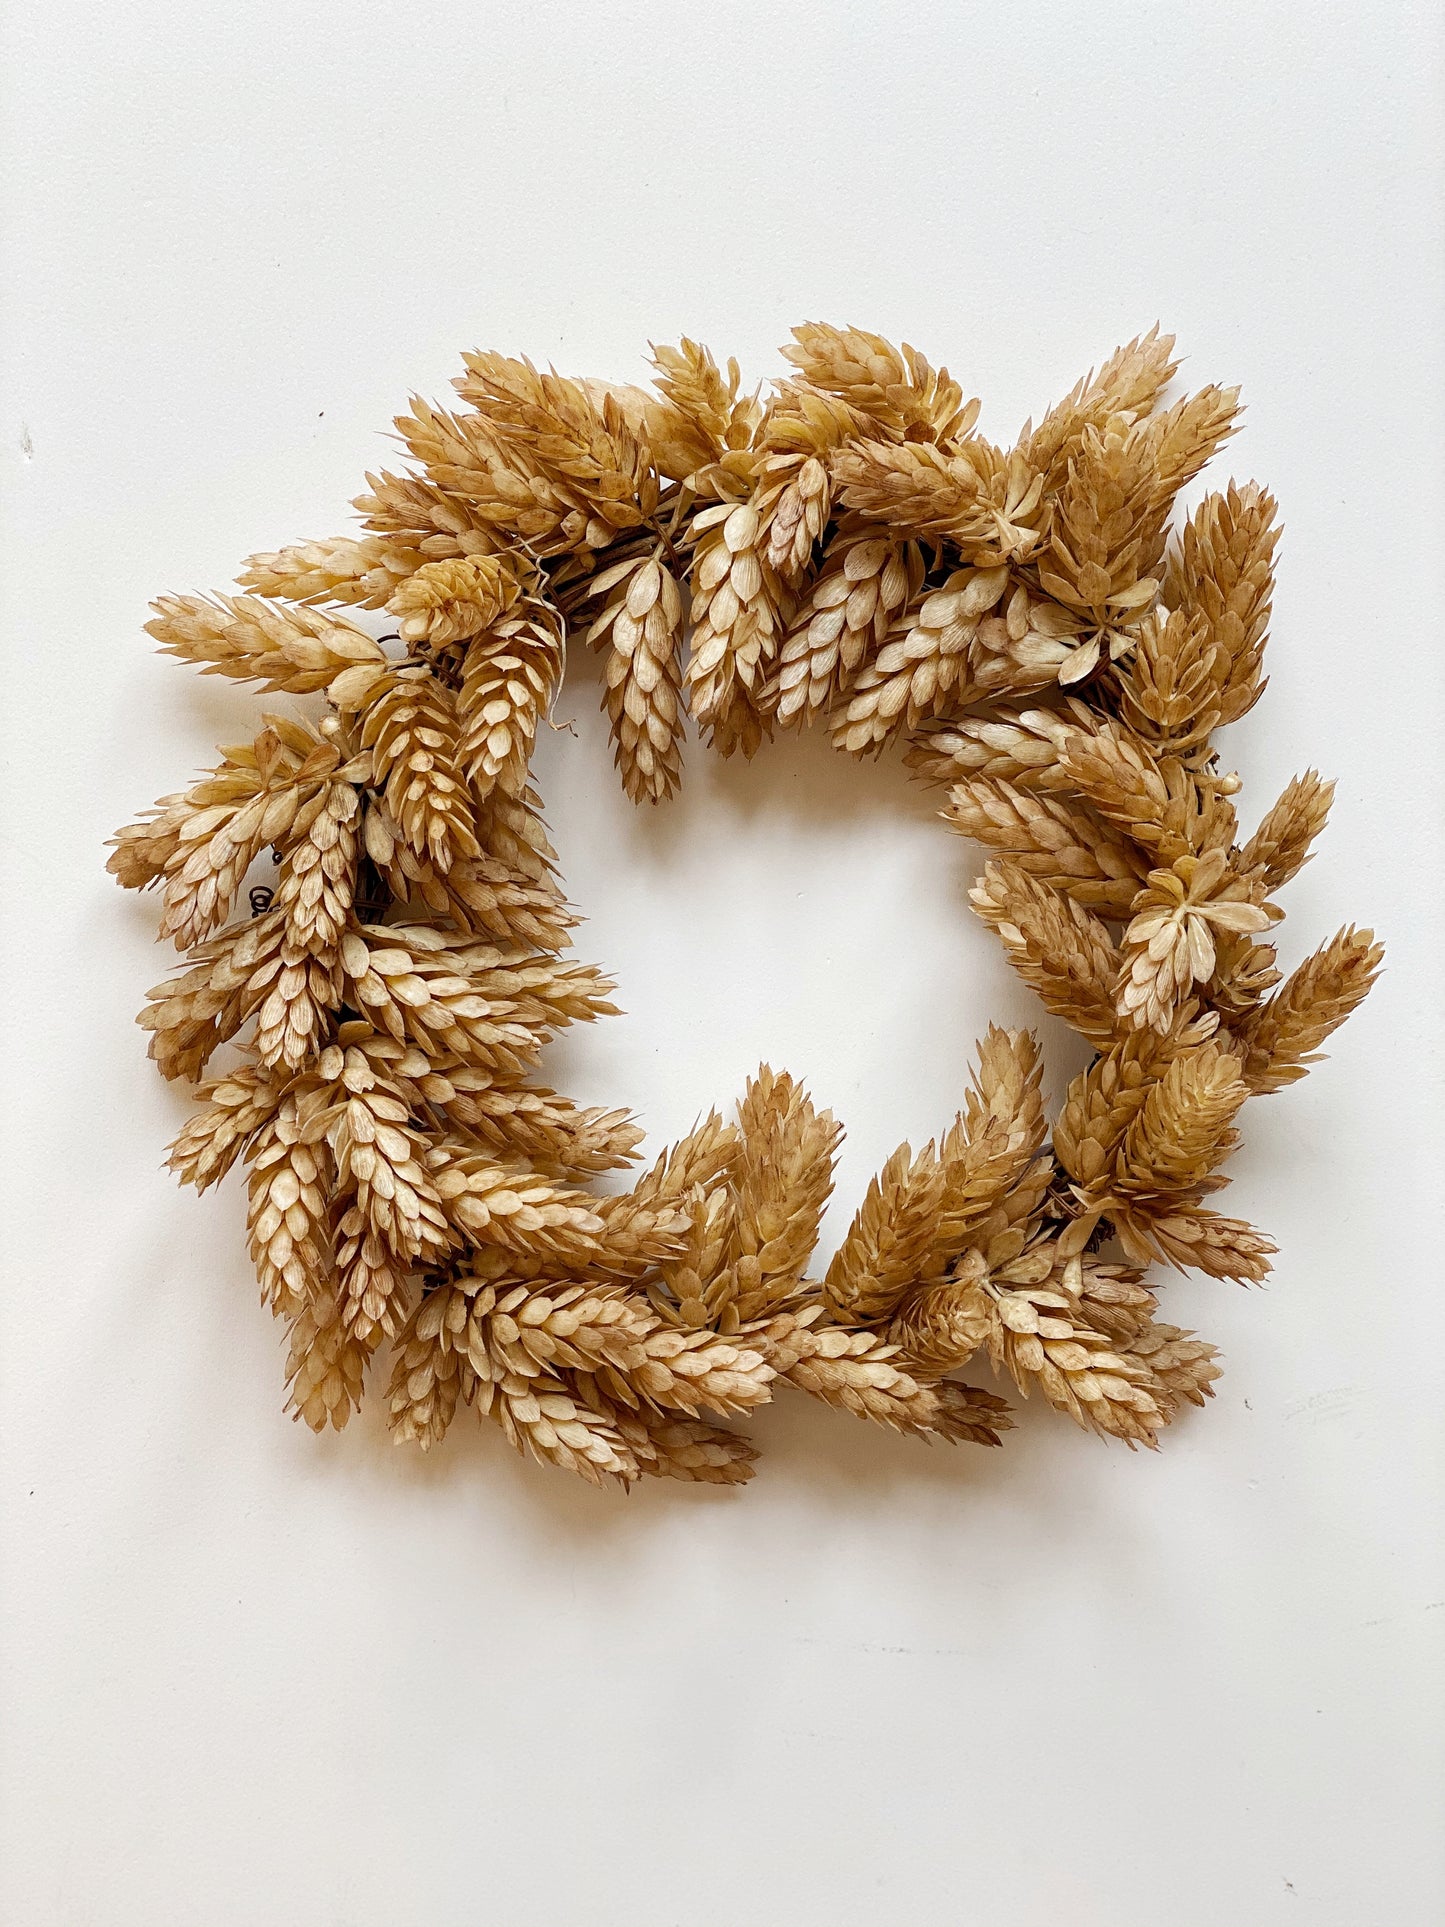 Hops wreath or candle ring